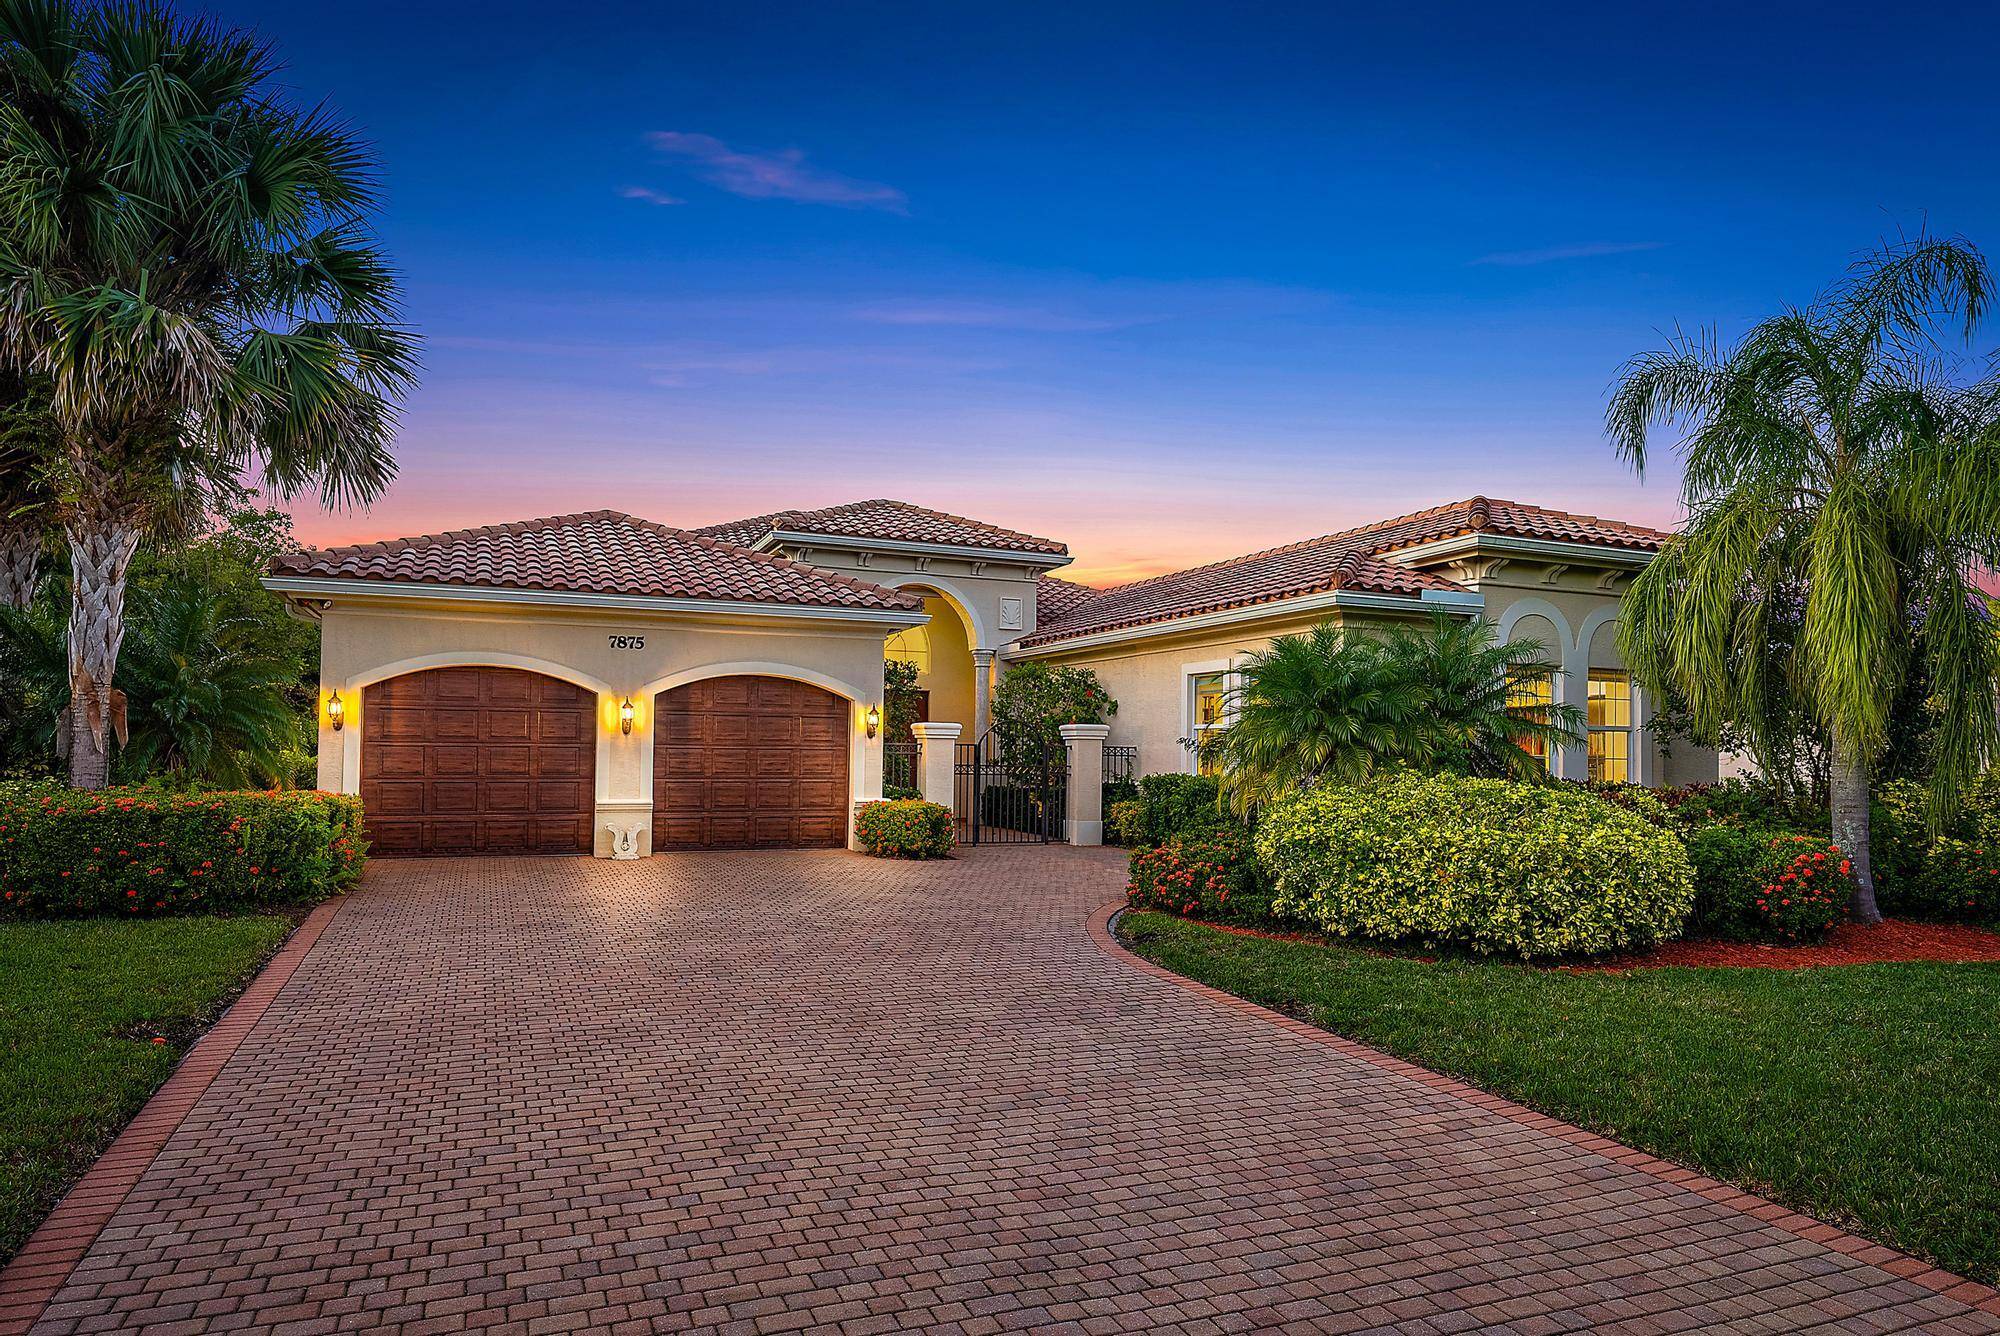 Presenting 7875 Arbor Crest Way in Palm Beach Gardens an exquisite residence crafted by the esteemed builder, GL Homes, and meticulously upgraded to surpass expectations.